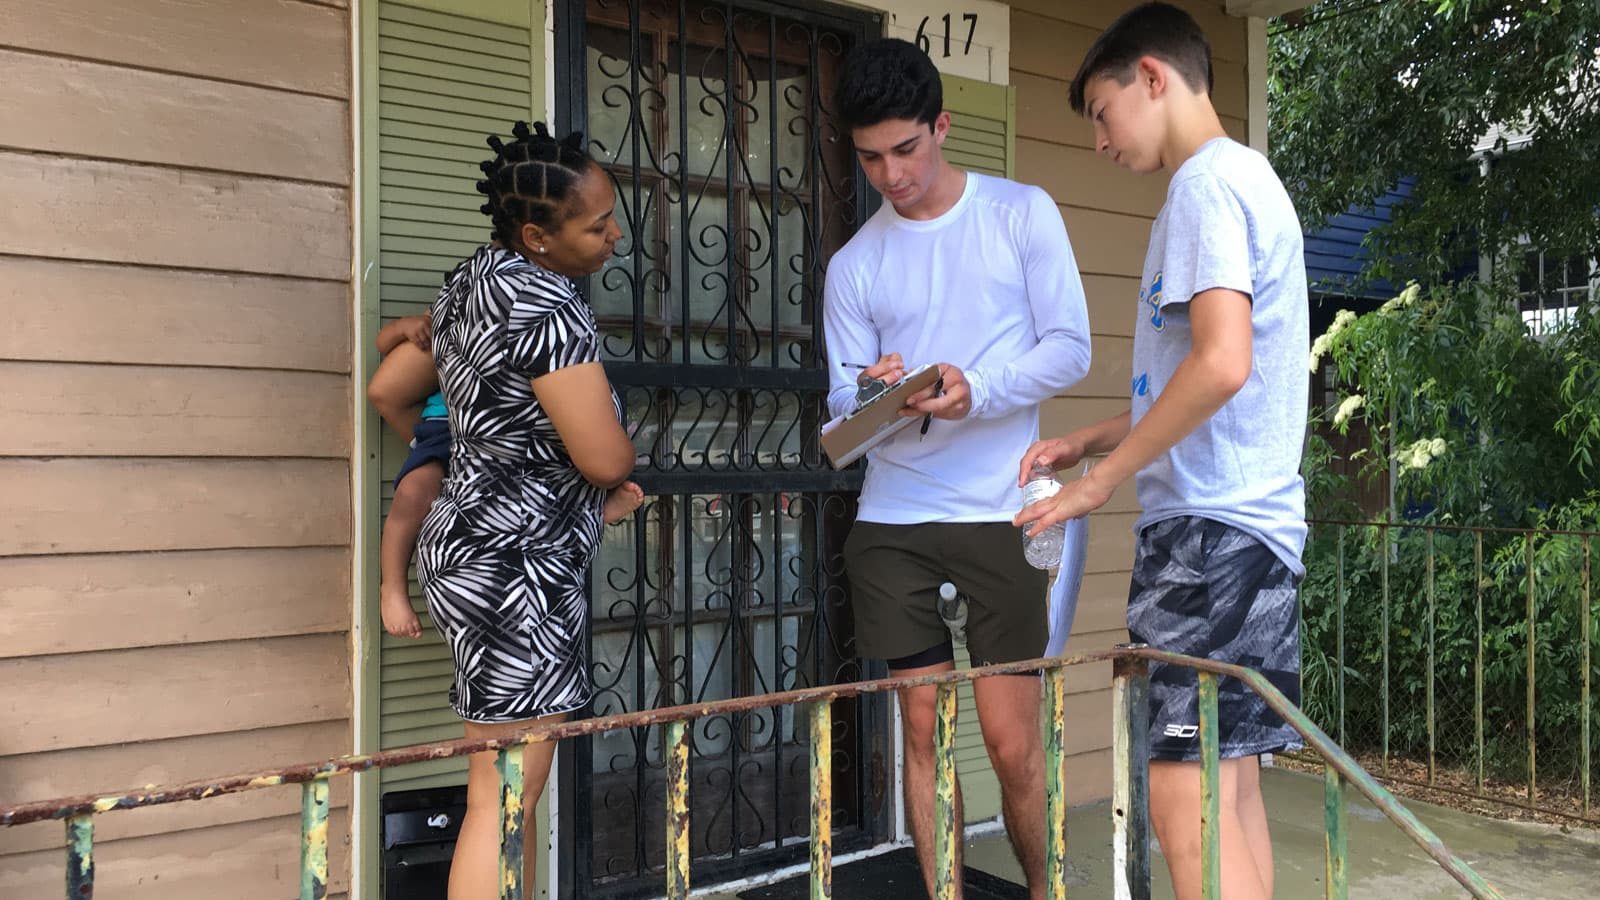 In New Orleans, students canvassed residents of the Lower Ninth Ward to find out about health care services, education options, and air and water quality. 